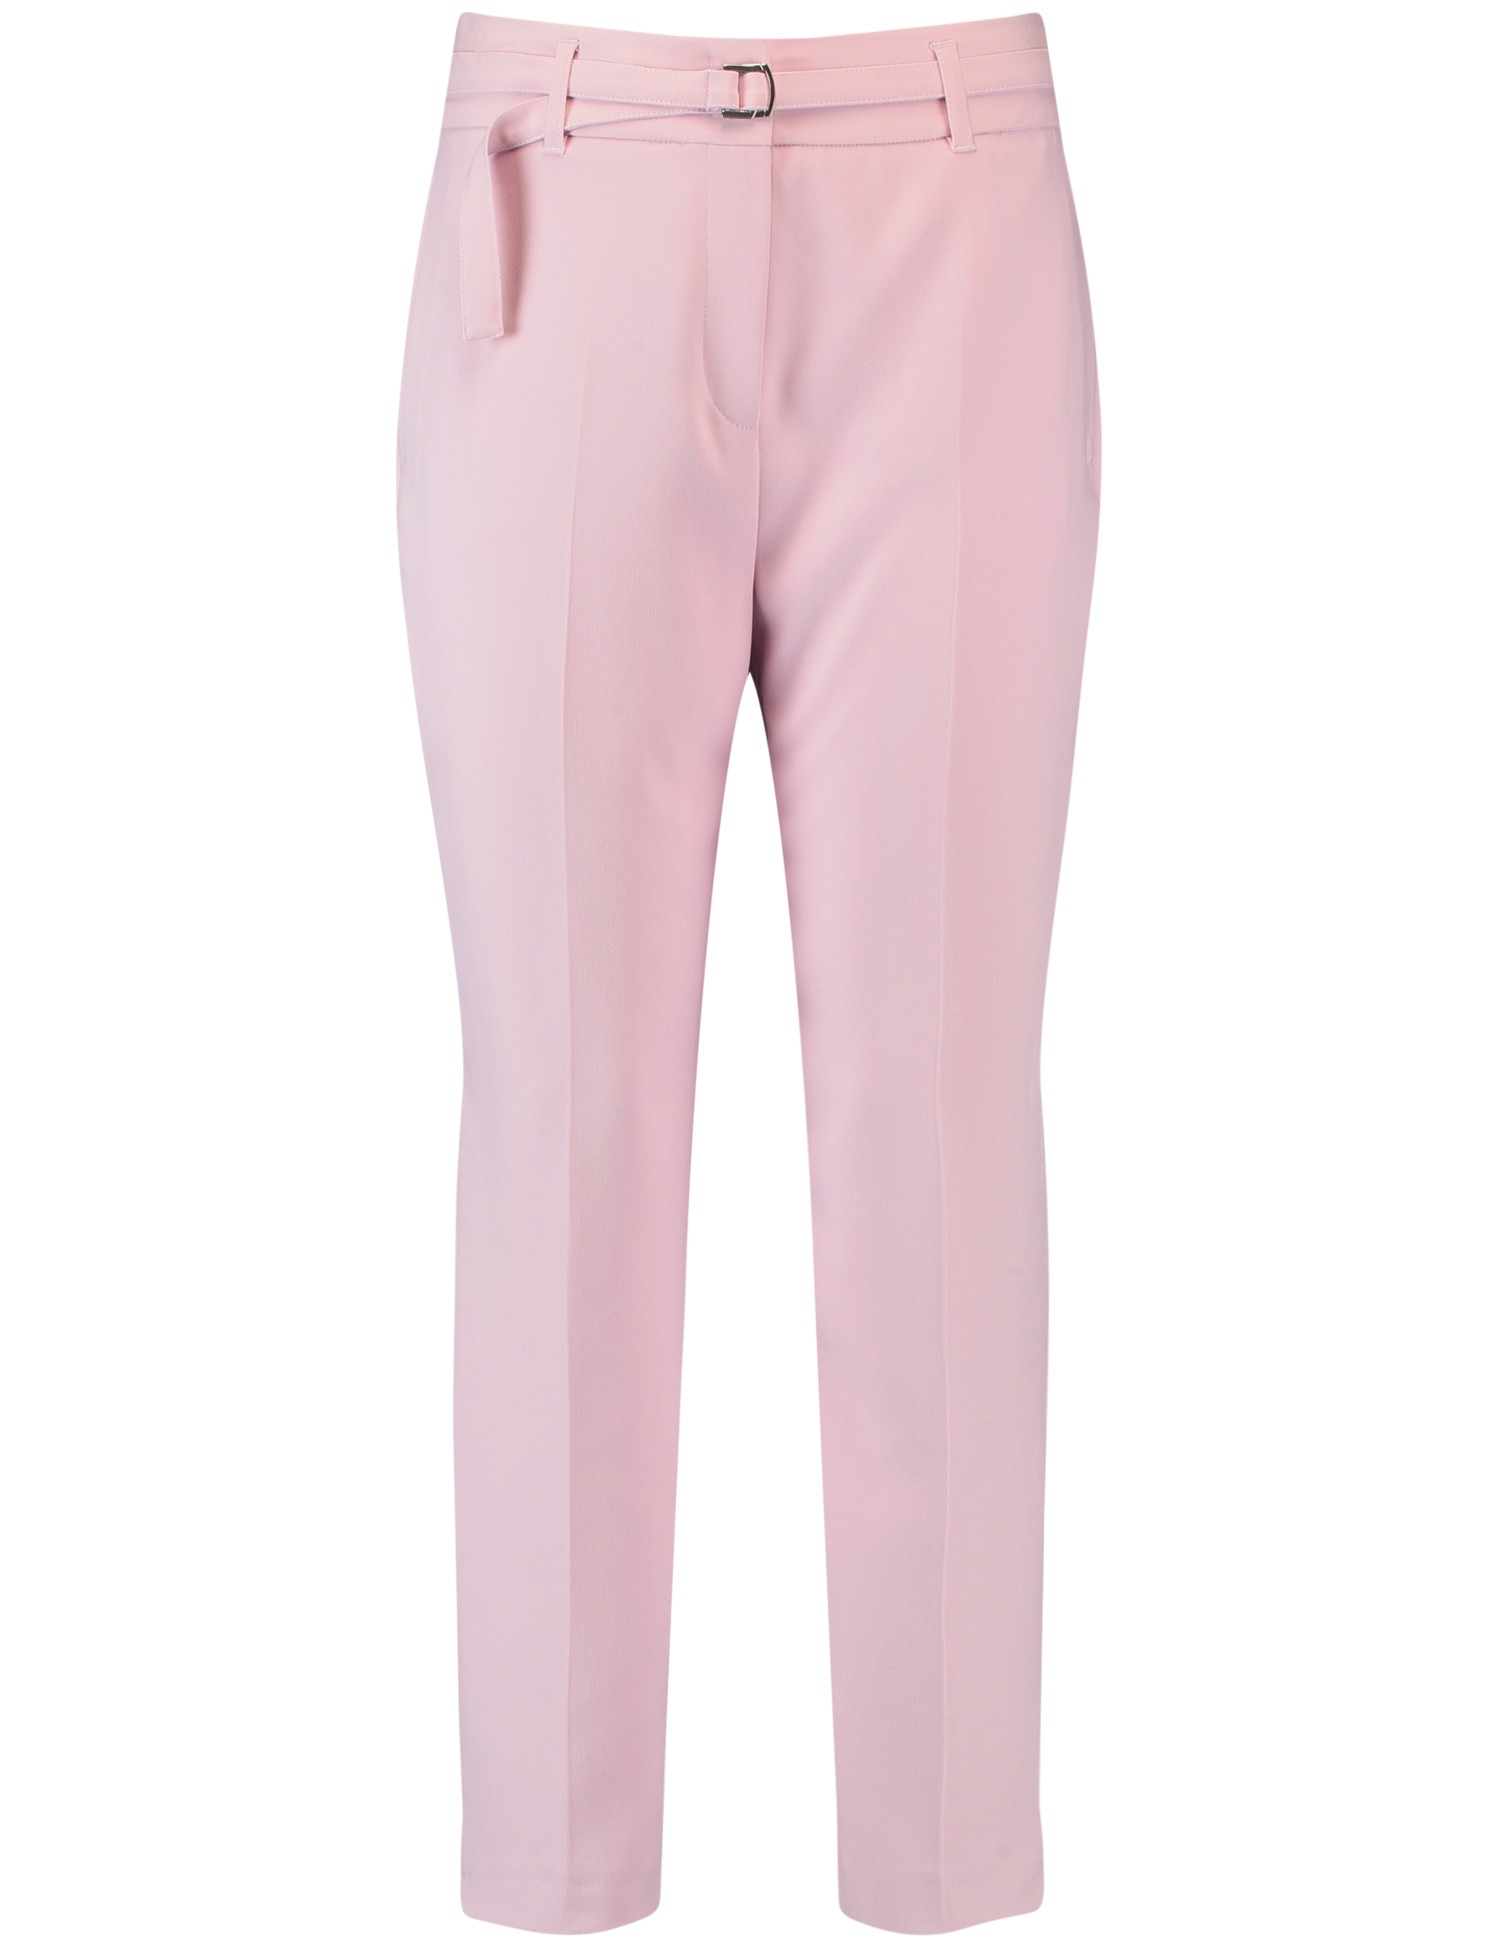 GERRY WEBER PINK TROUSERS | Rosella - Style inspired by elegance